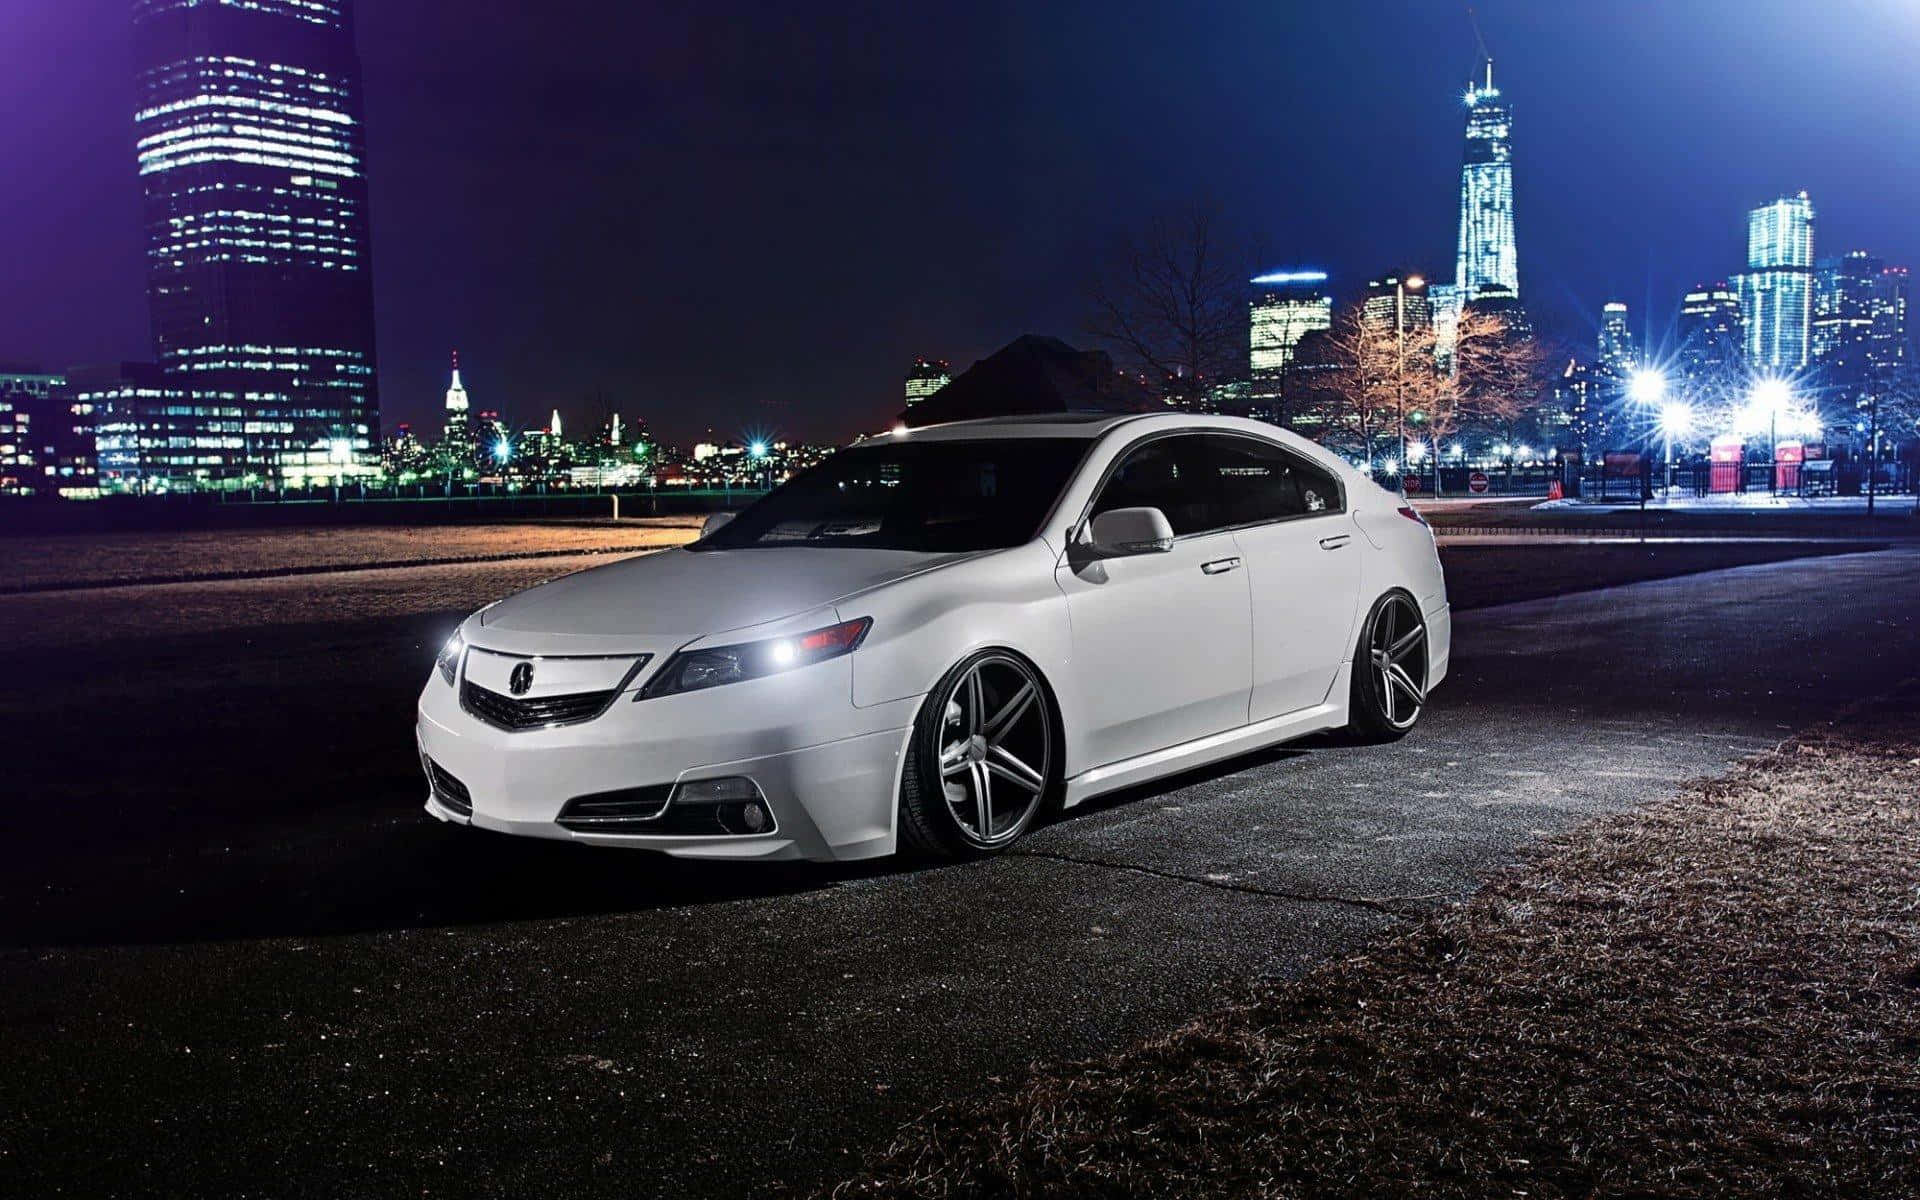 Sleek and Stylish Acura TL on the Open Road Wallpaper